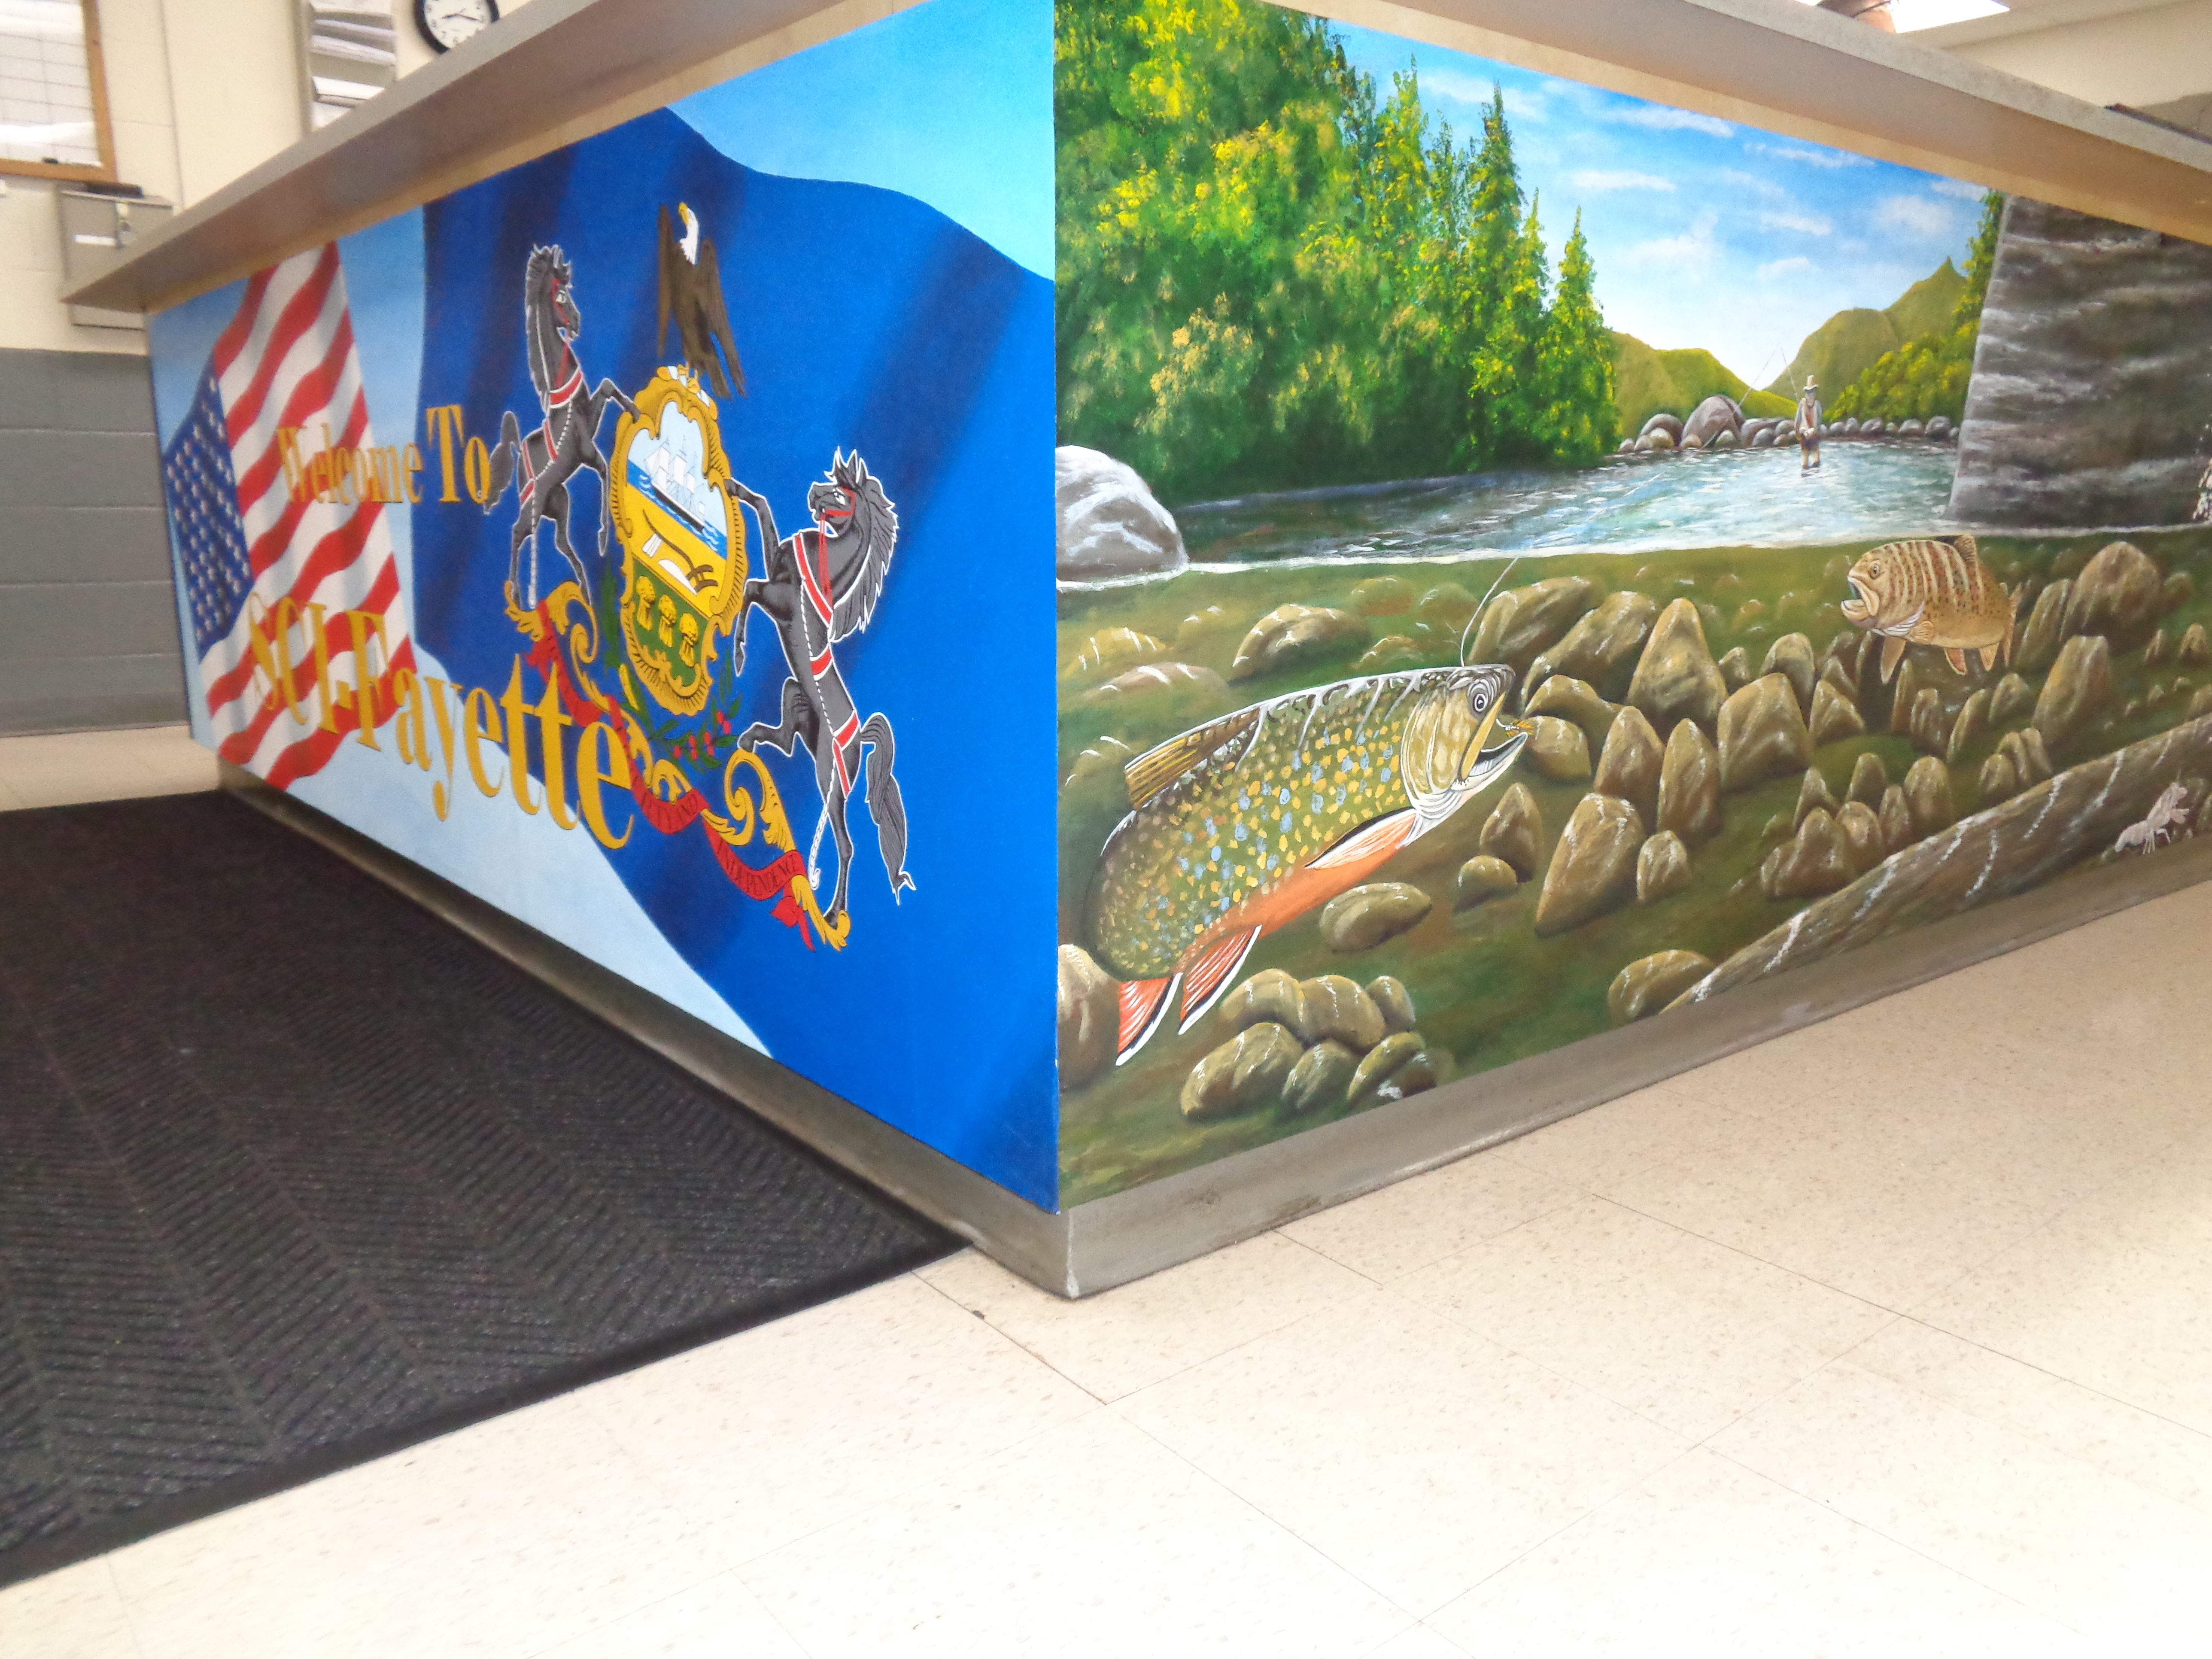 Murals showing a forest river scene and the US and Pennsylvania flags